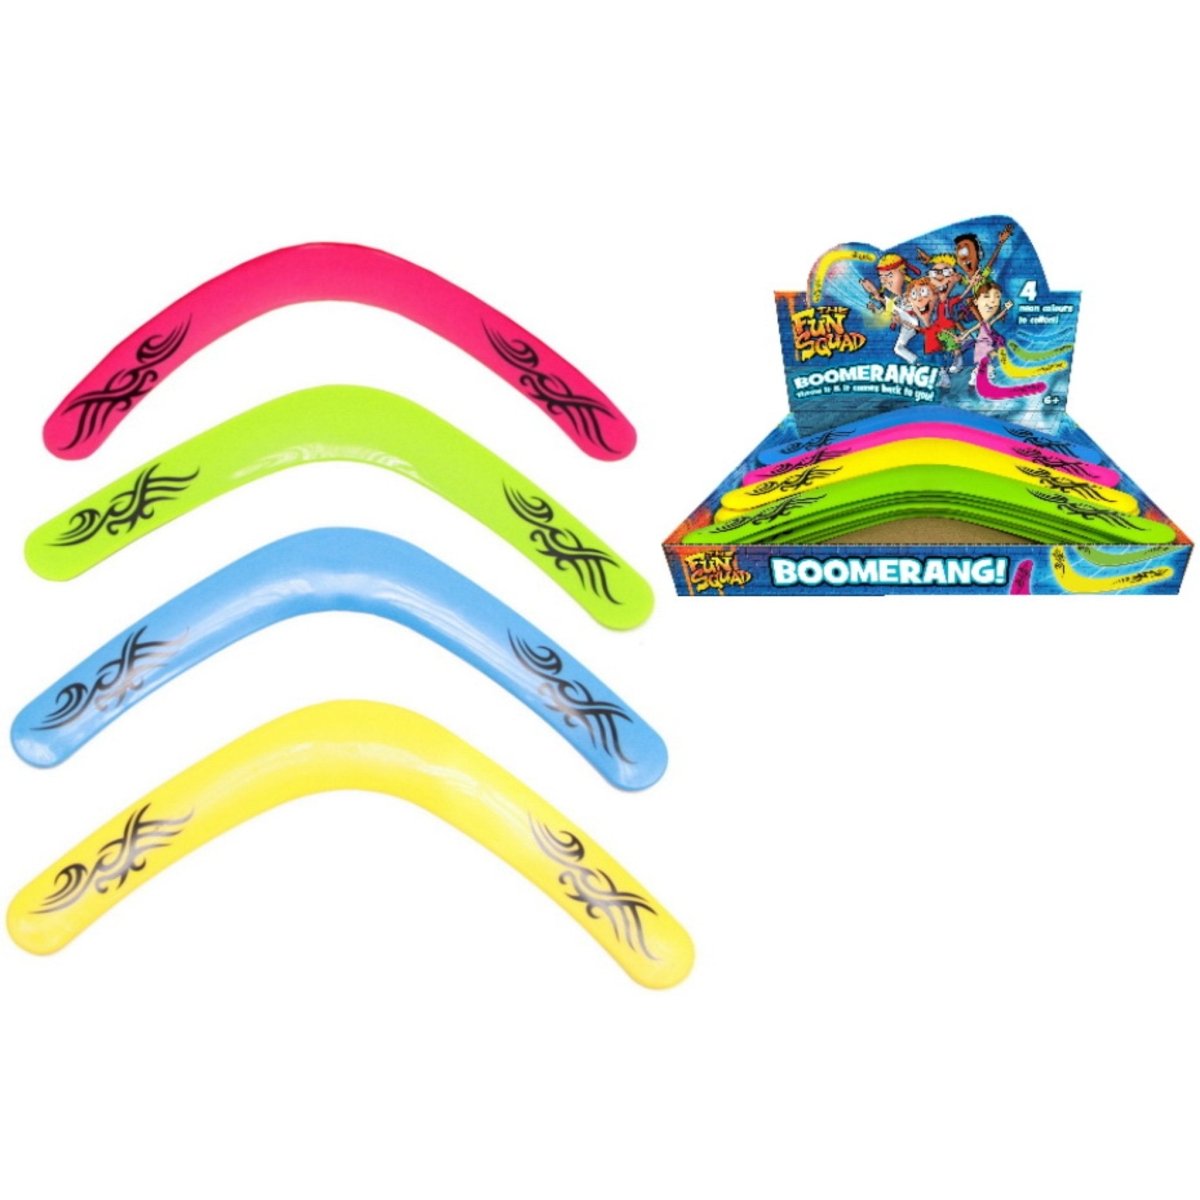 Boomerang Neon Colour - Kids Party Craft